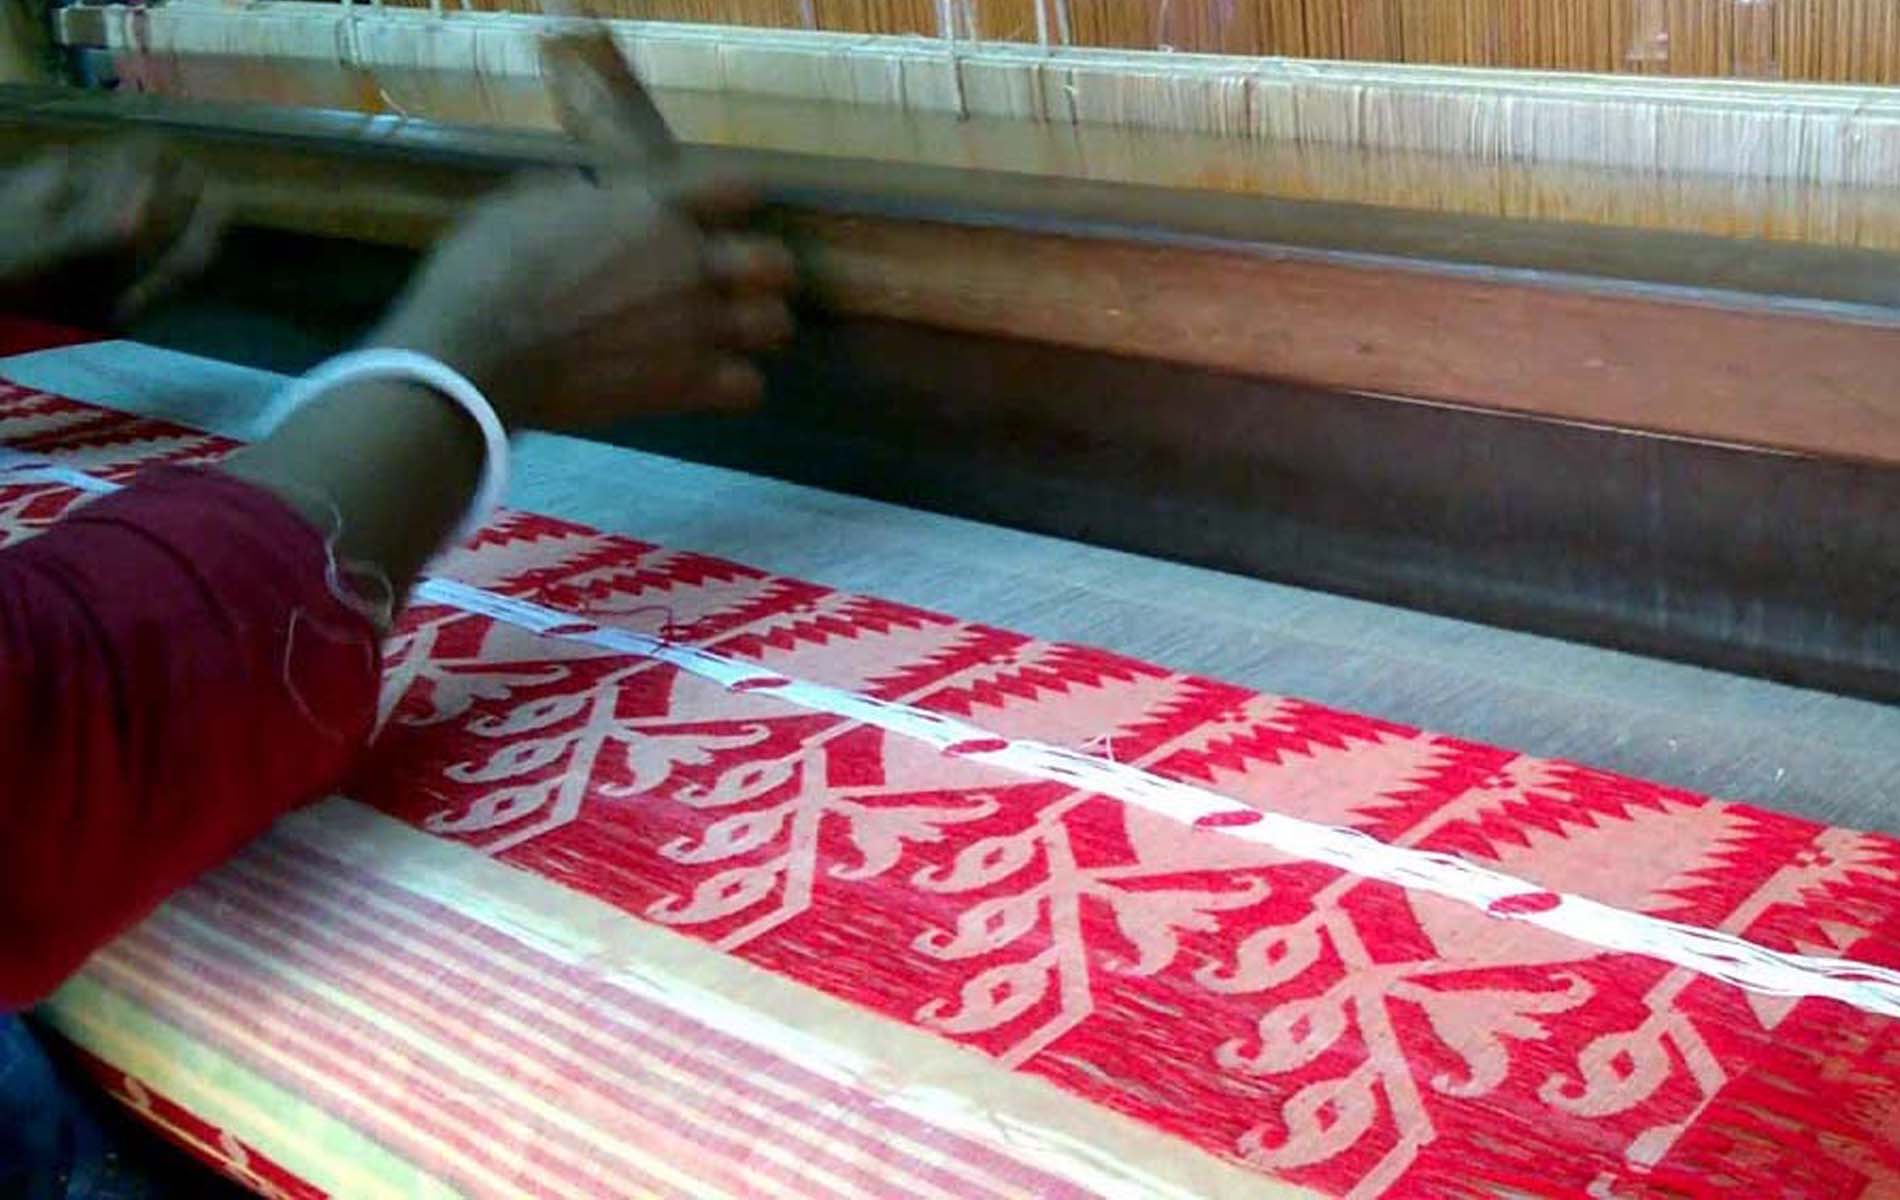 Shantipur – A town where dreams are woven in intricate handlooms